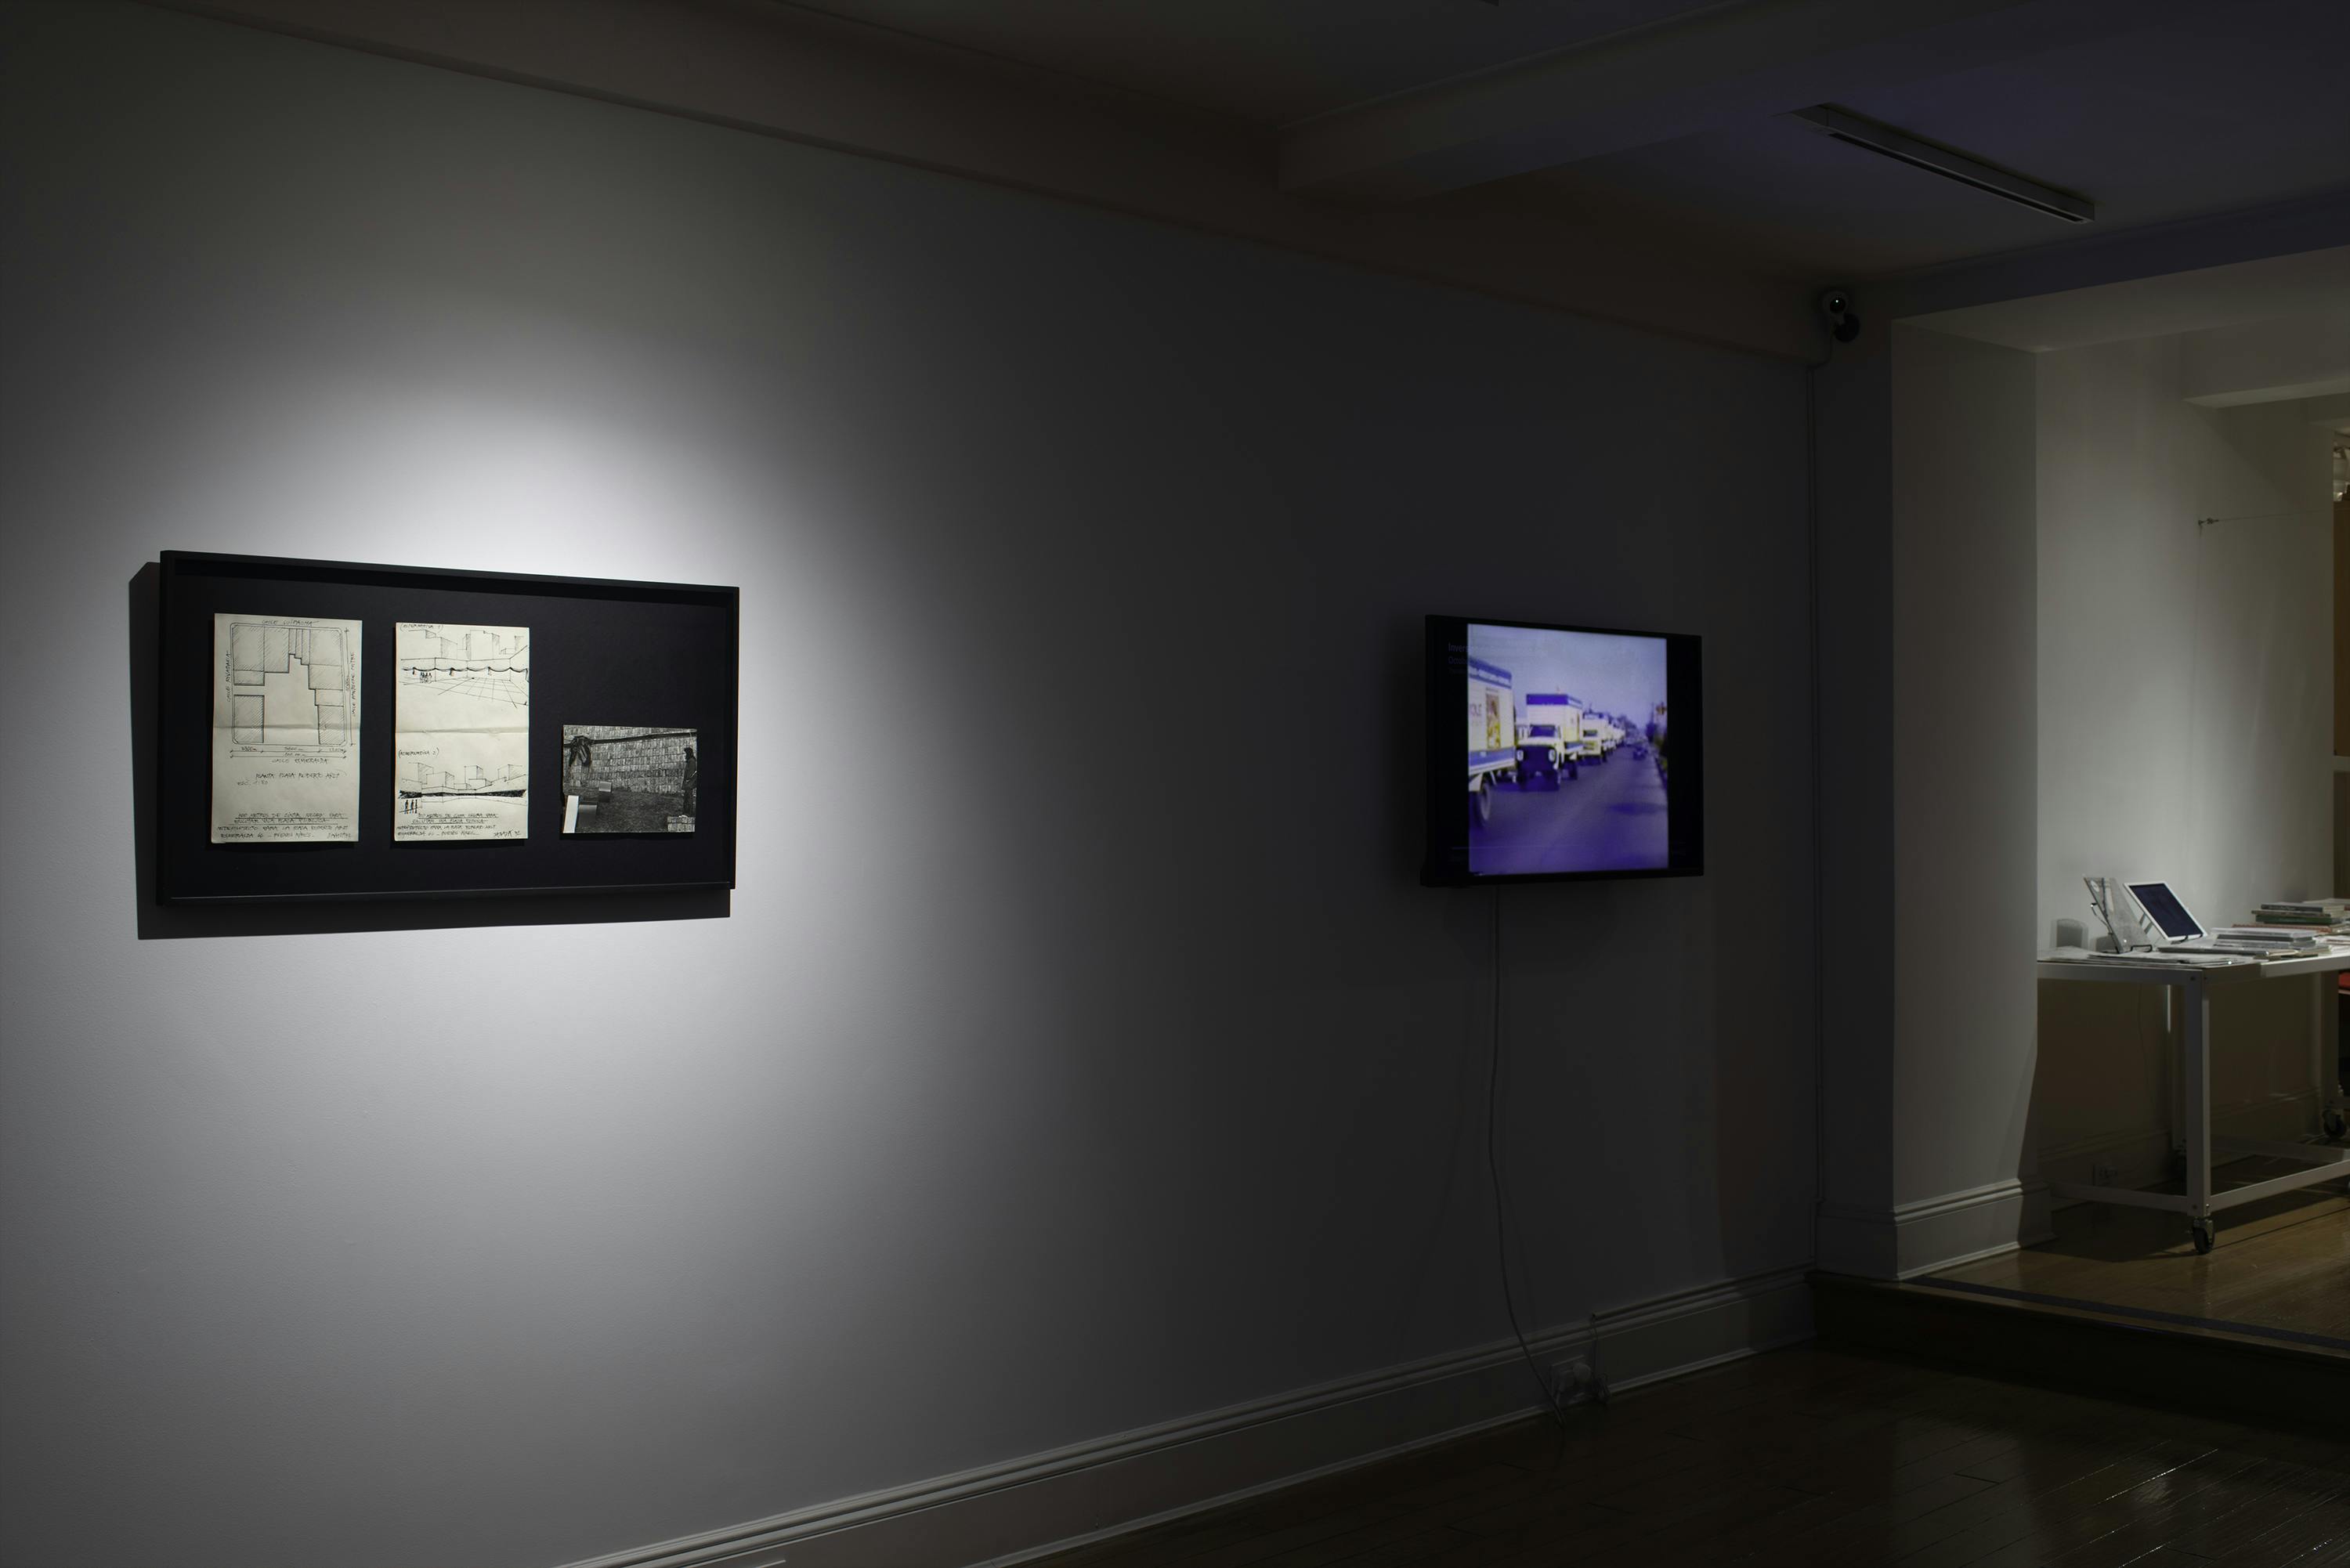 Right side view of mounted and framed original documents and a TV screen playing video.